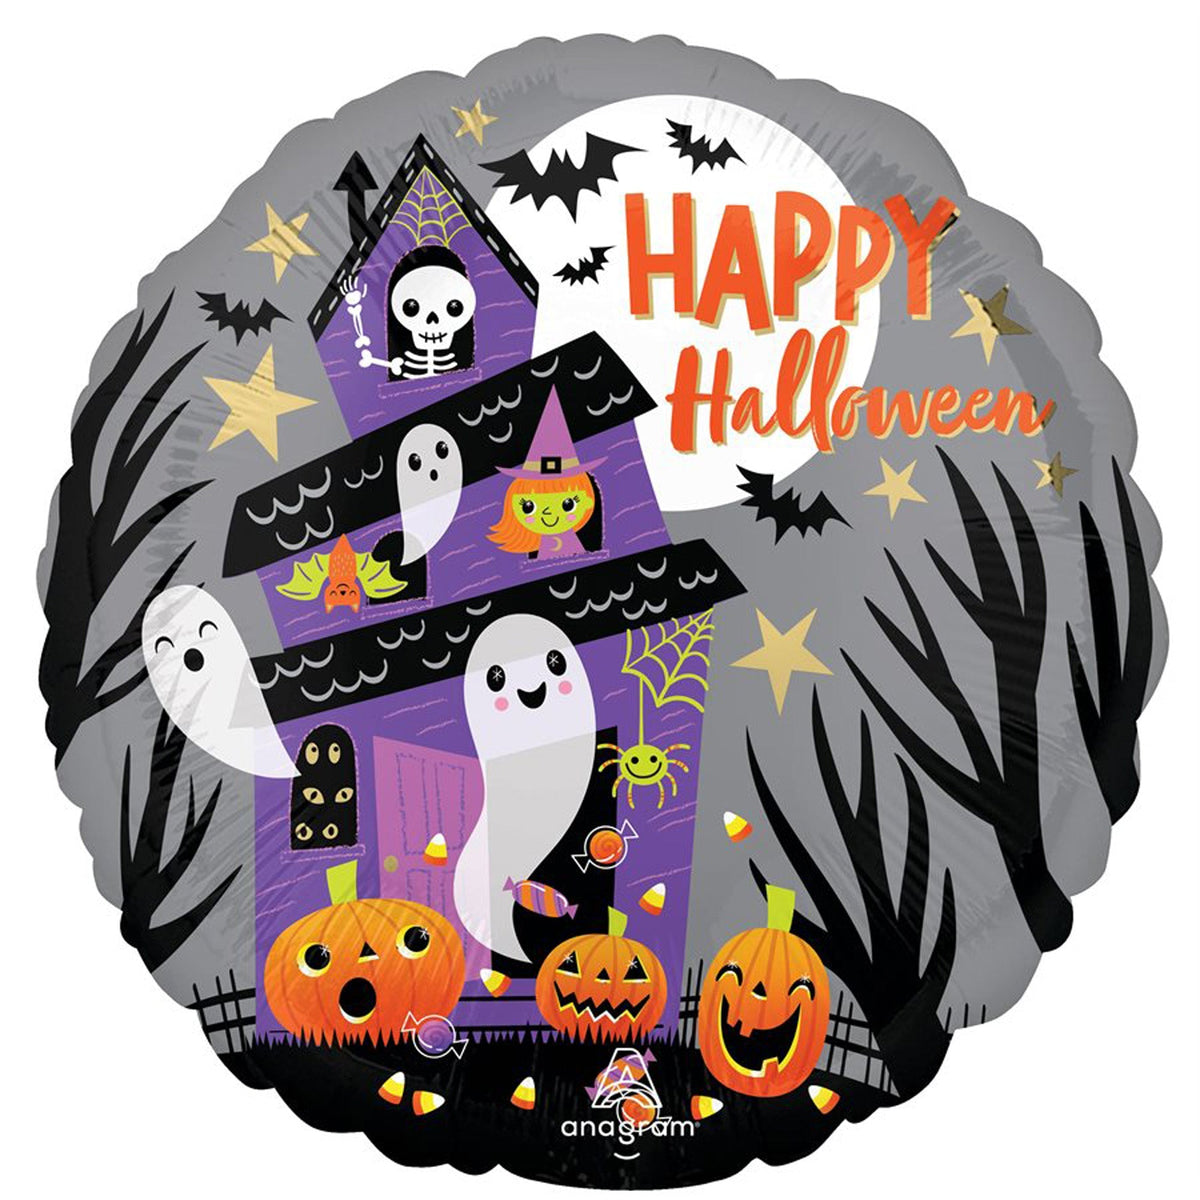 LE GROUPE BLC INTL INC Balloons Halloween Haunted House Round Foil Balloon, "Happy Halloween", 18 Inches 026635448154